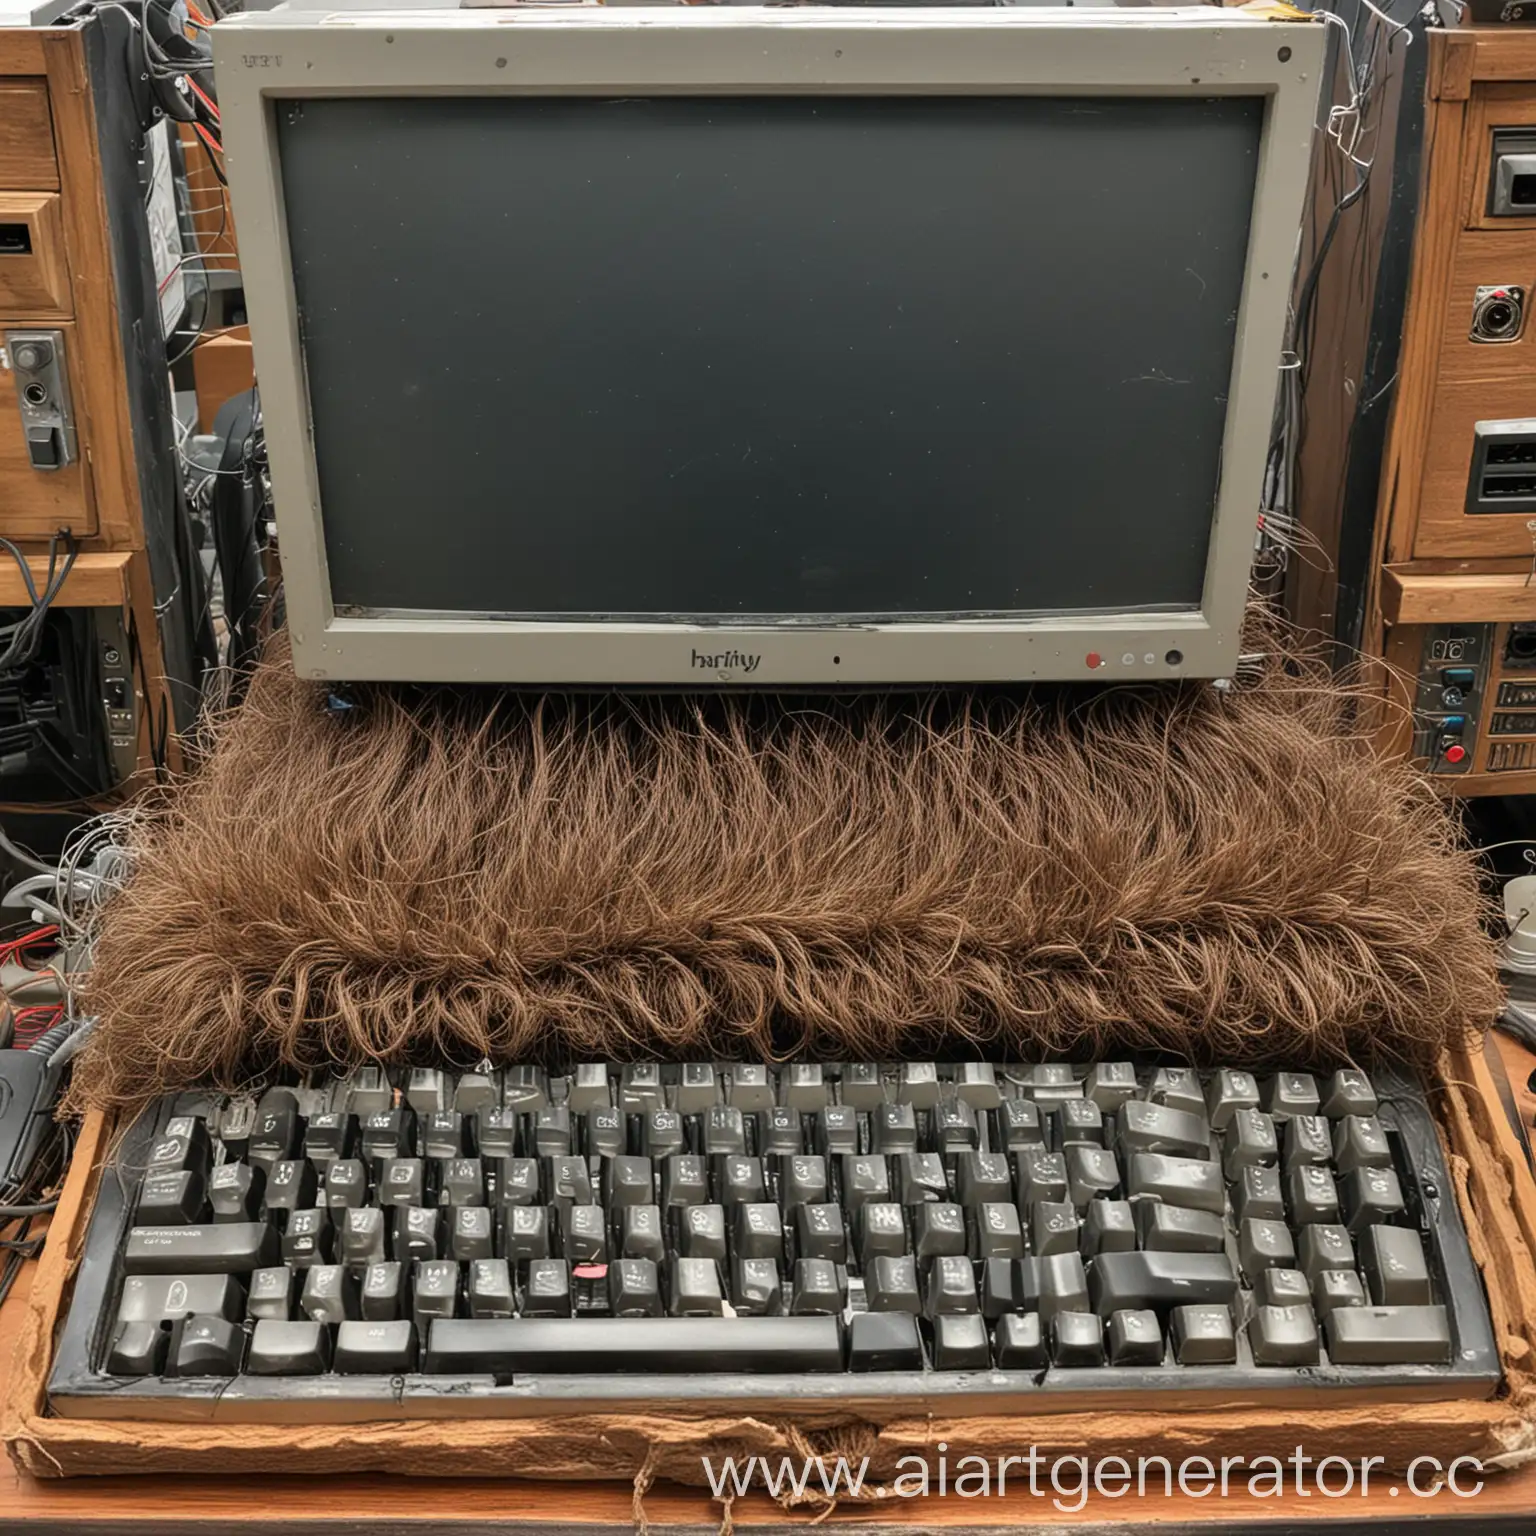 hairy computer bought in the marketplace